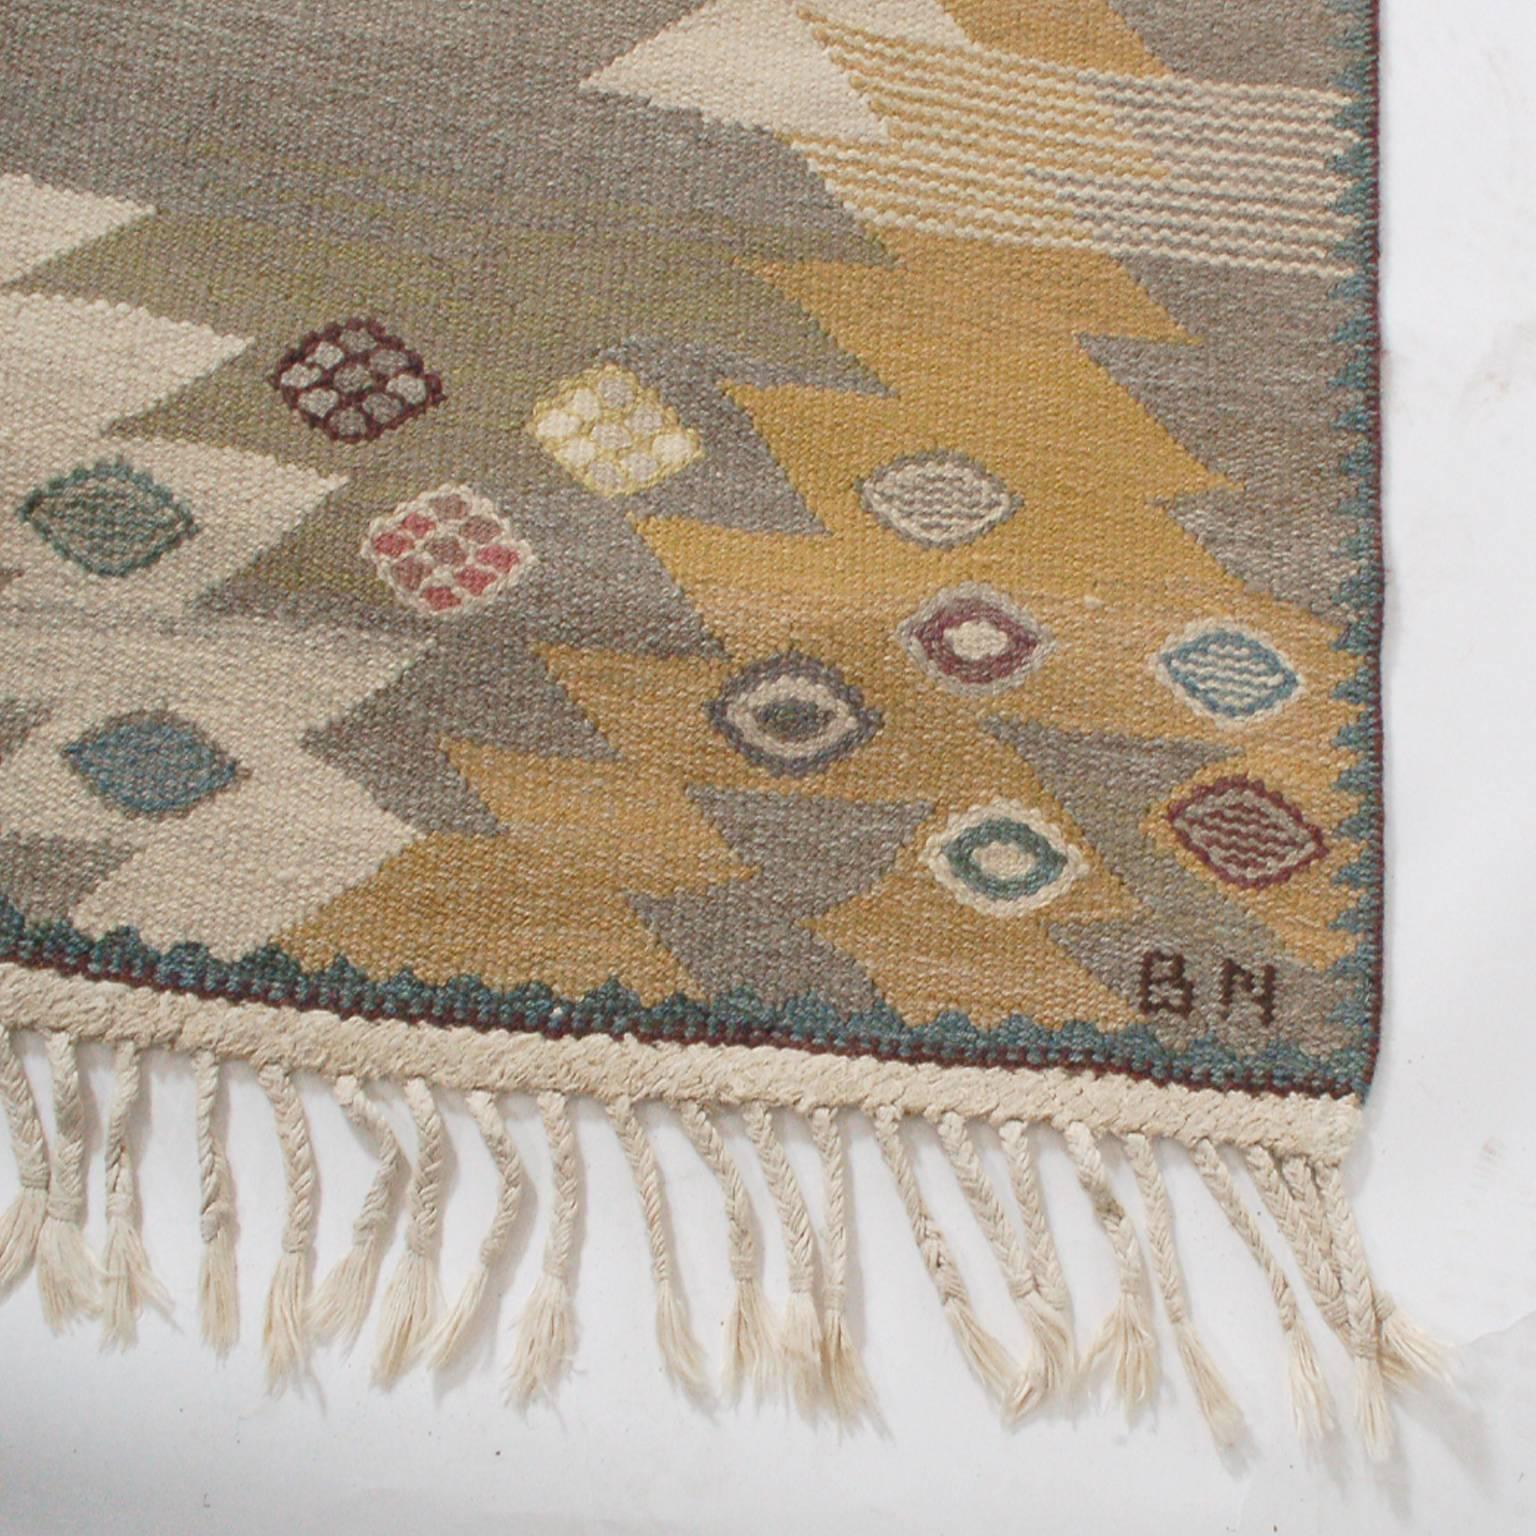 Flat-weave rug created for the Swedish rug company Marta Maas-Fjetterström in the 1950s, by their premiere designer. Retains original fringe. Signed with artist's initials, BN and MMF at the bottom edge.